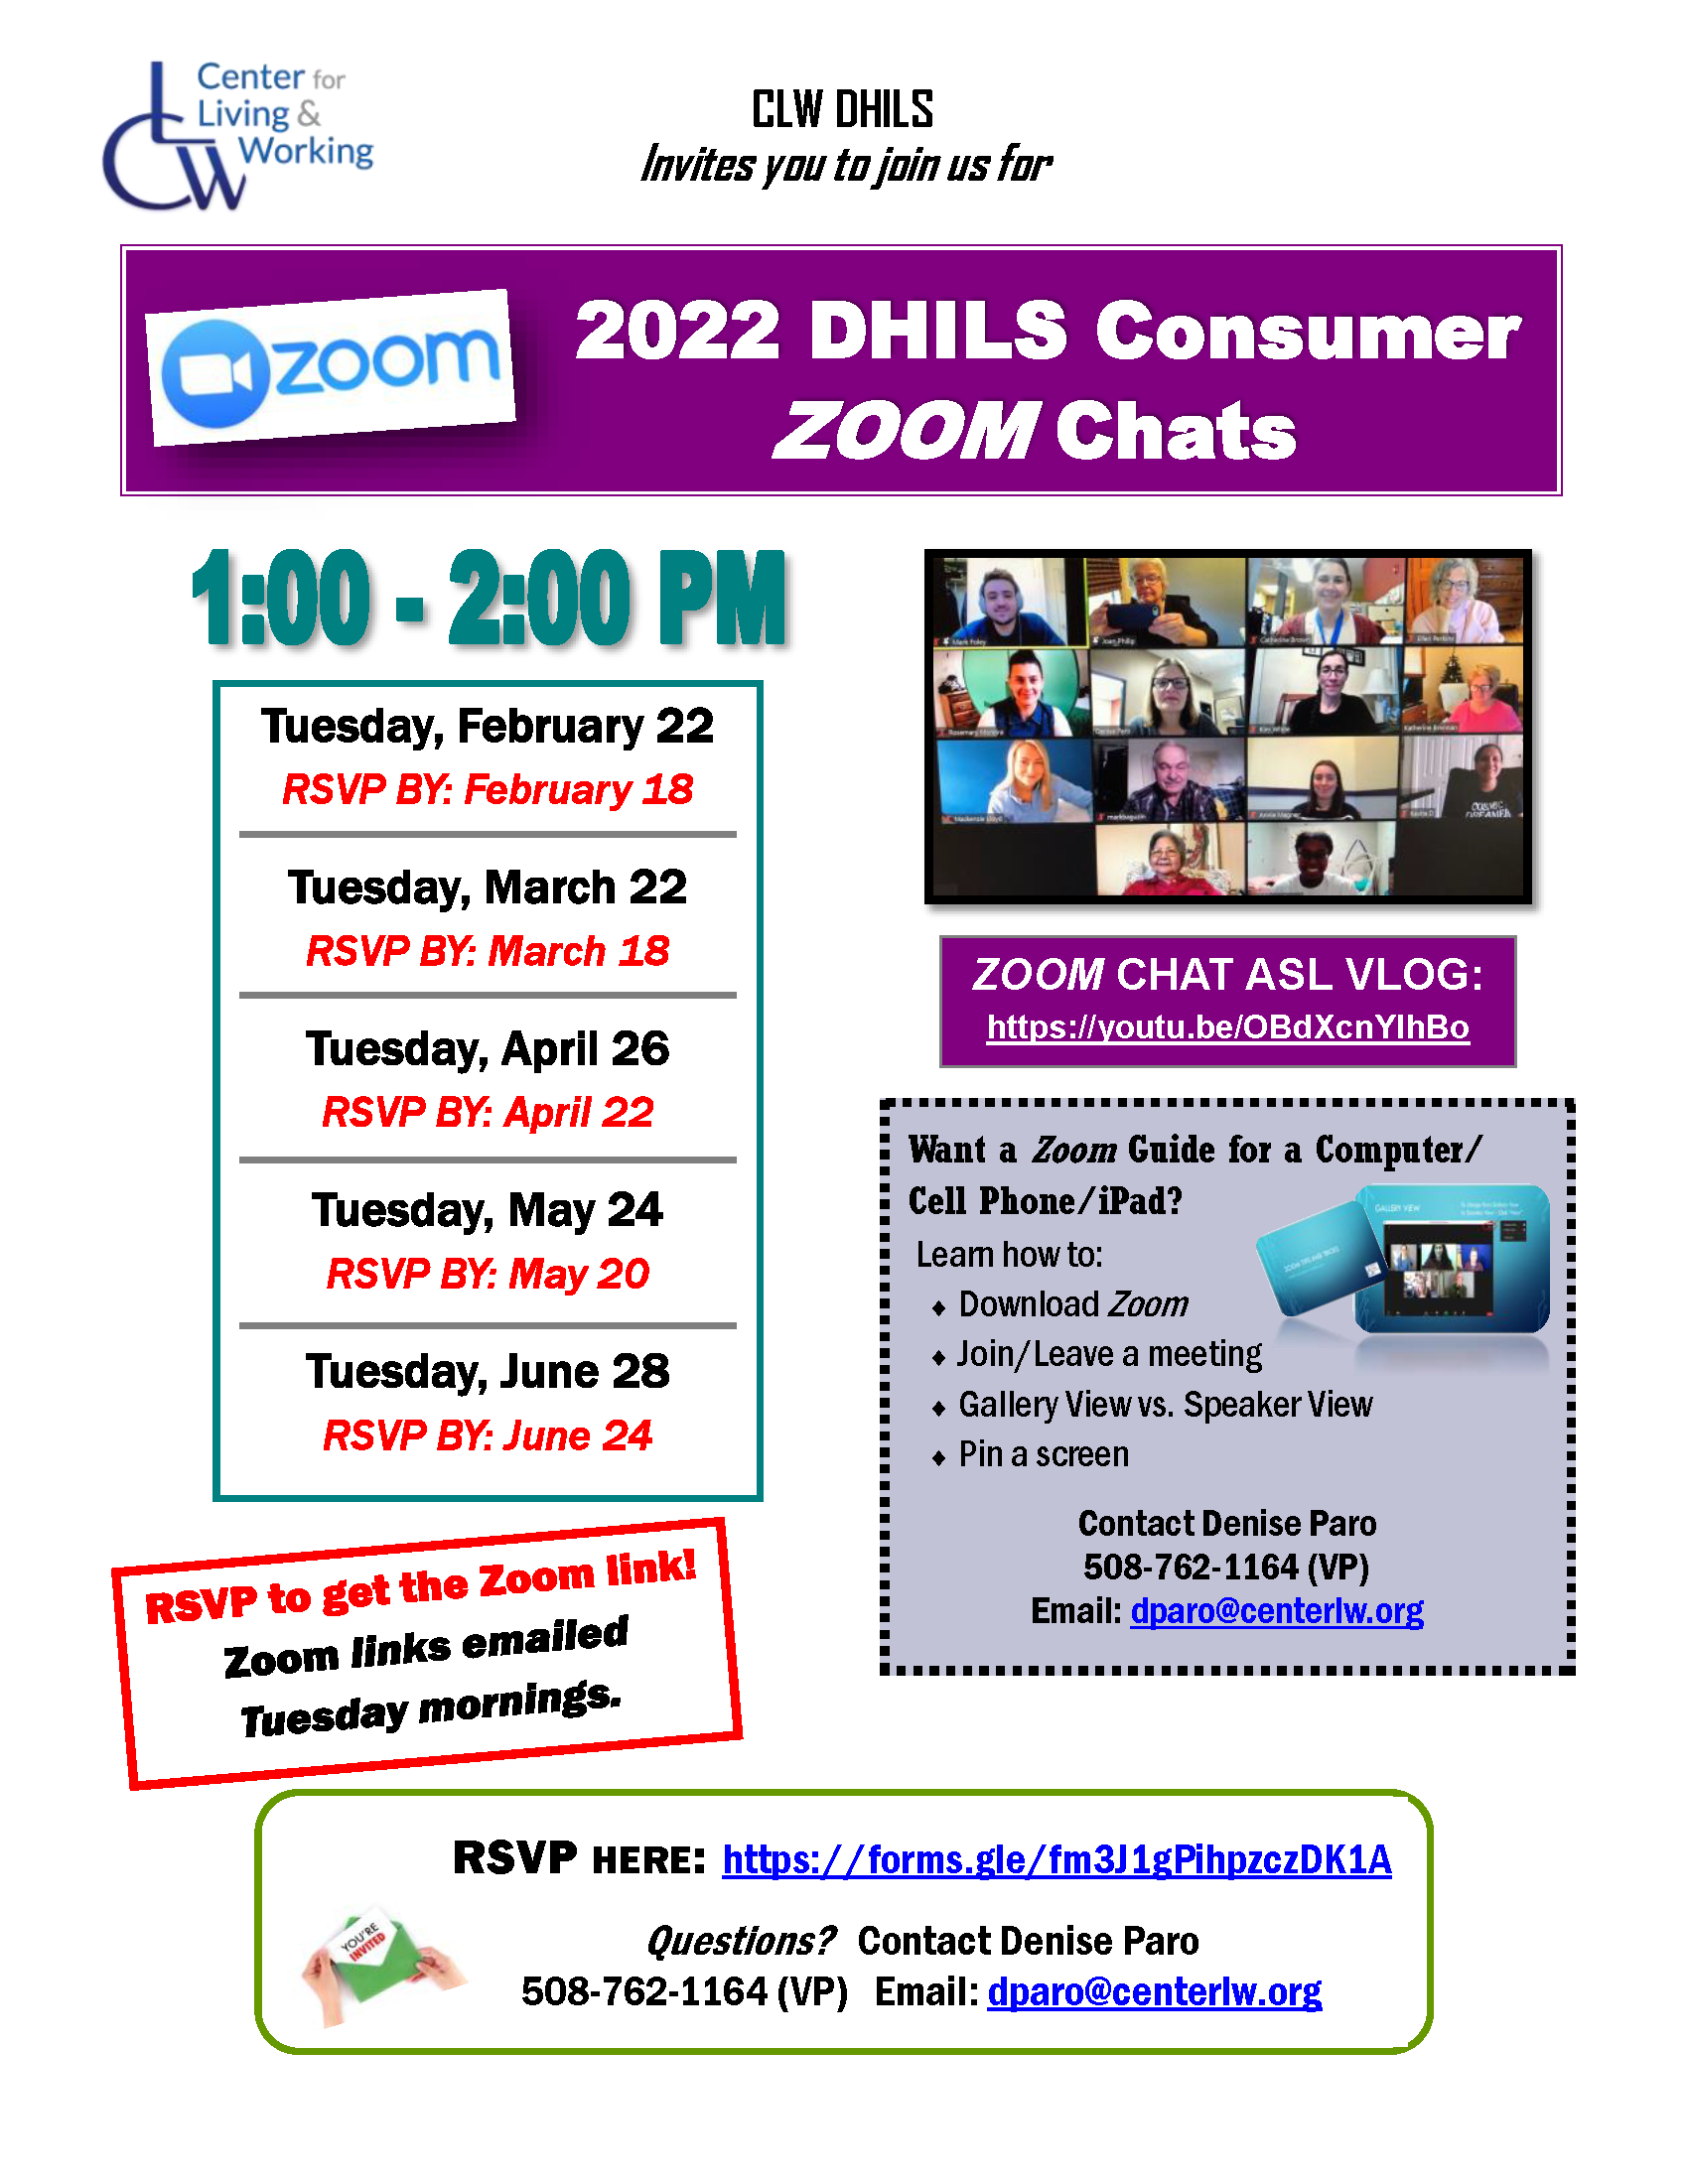 DHILS Consumer Zoom Chats